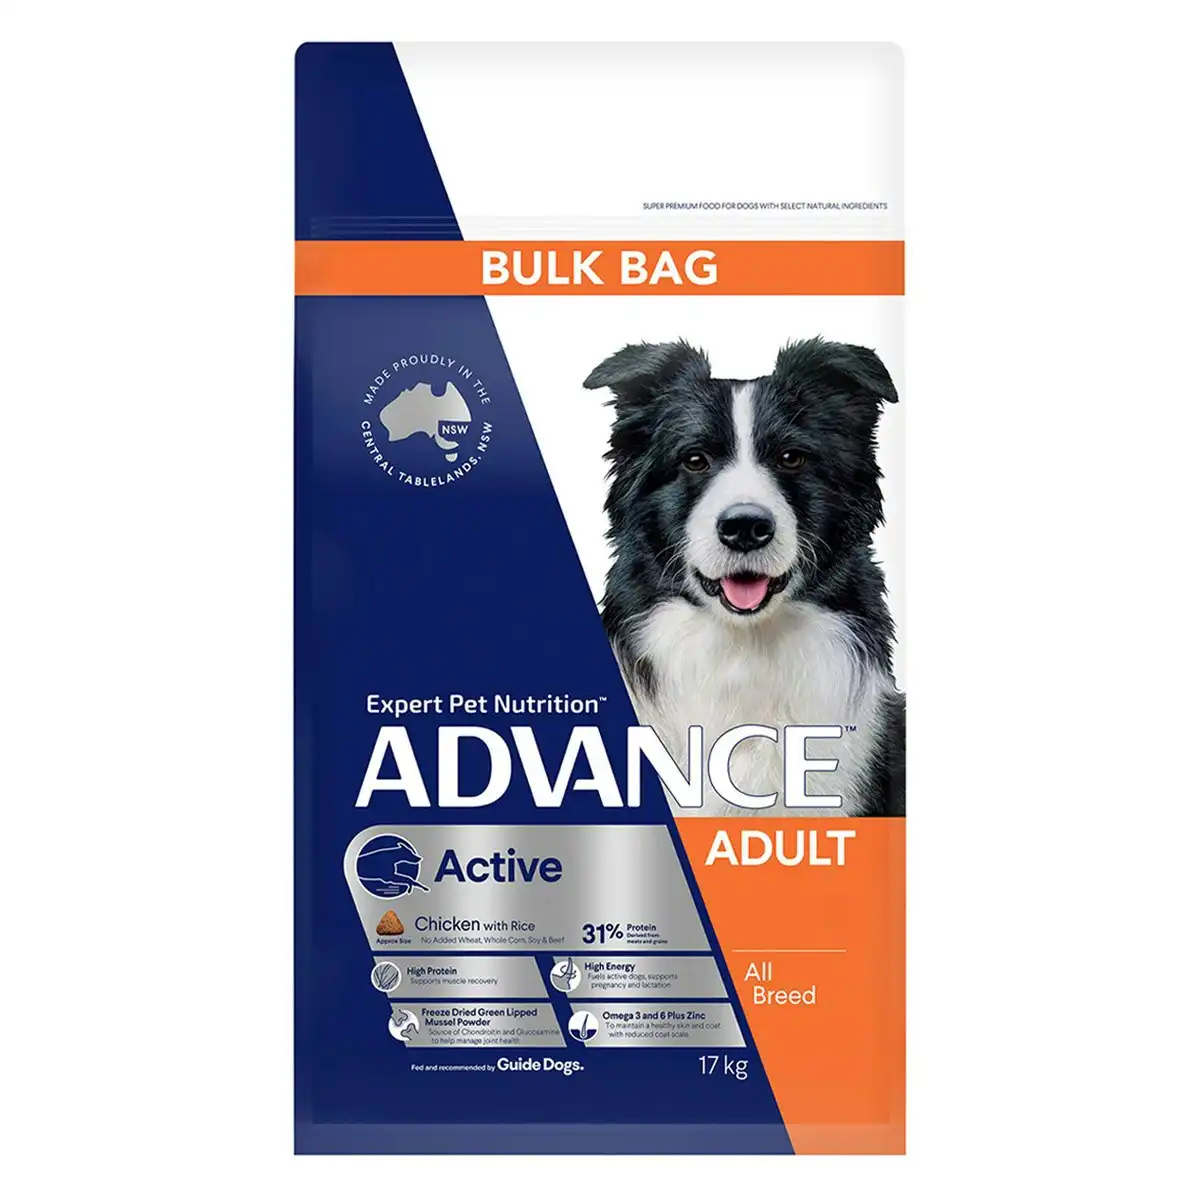 ADVANCE Active Adult All Breed Chicken with Rice Dry Dog Food 17 Kg